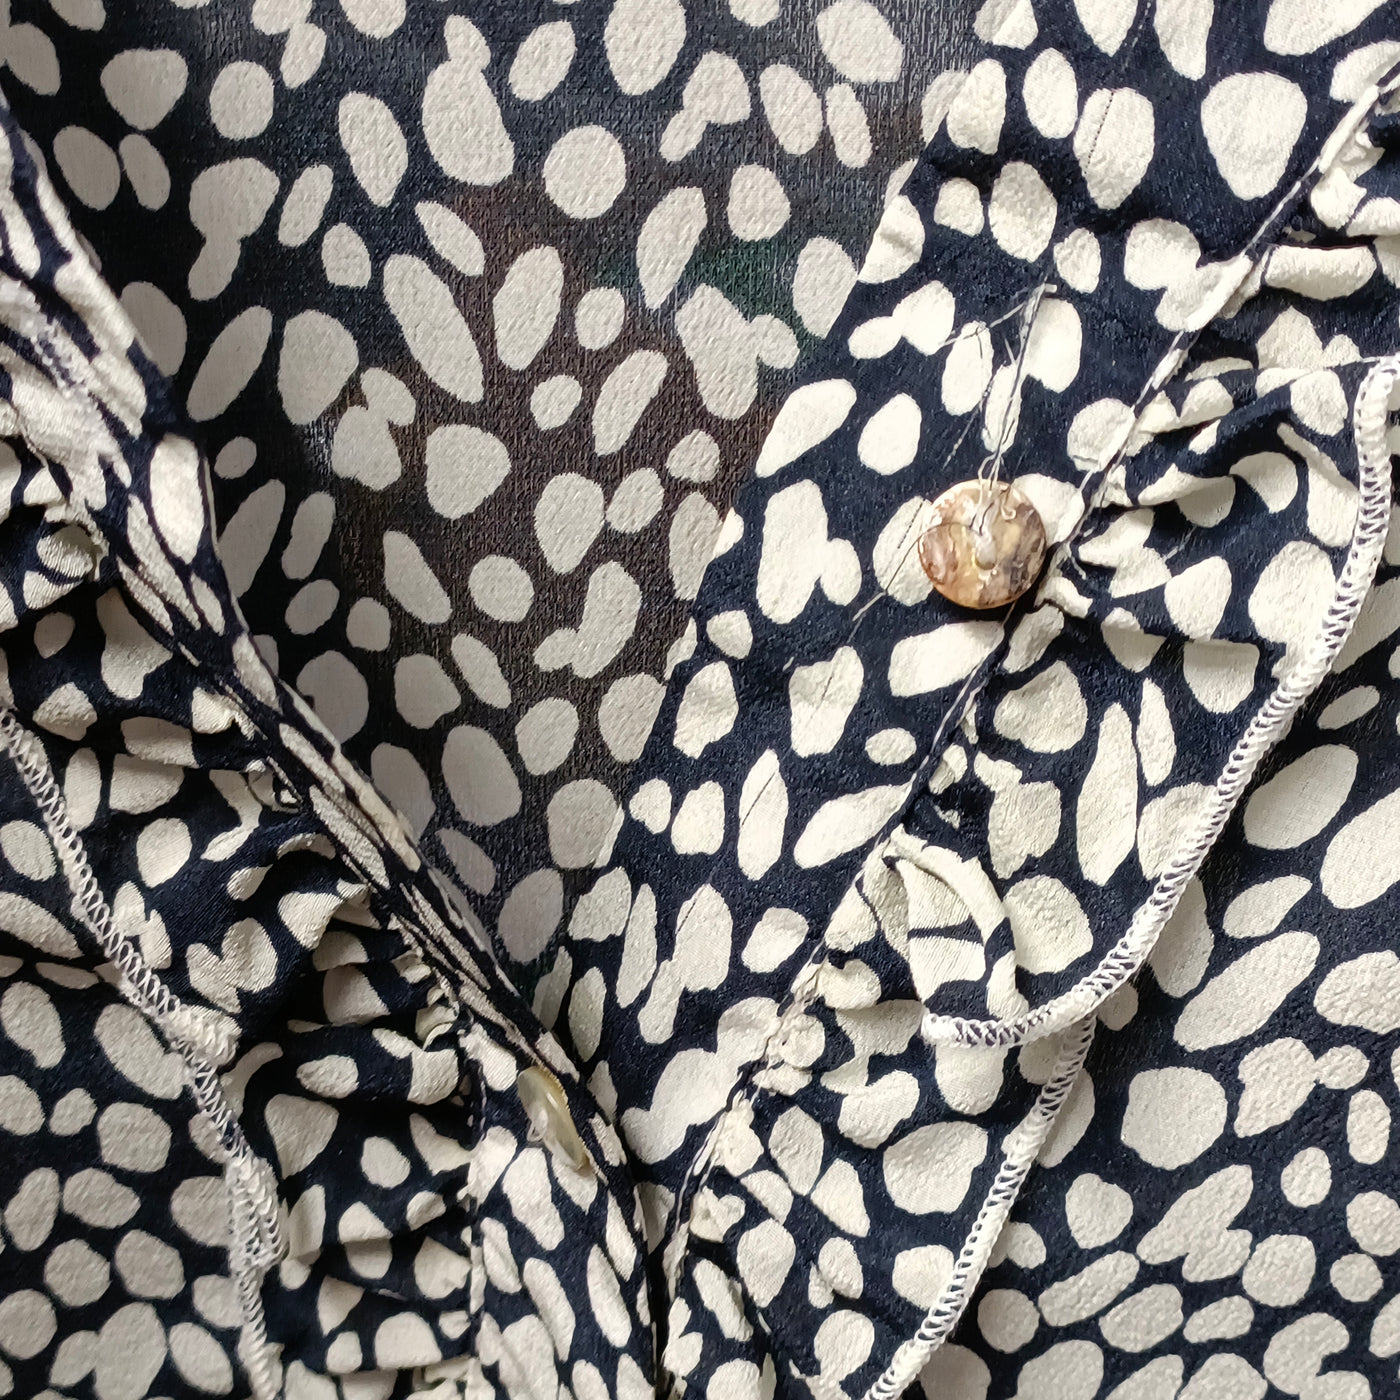 #89 Emily Navy/White Abstract Print Silk Shirt - FAULT - SIZE S (UK 8/10)